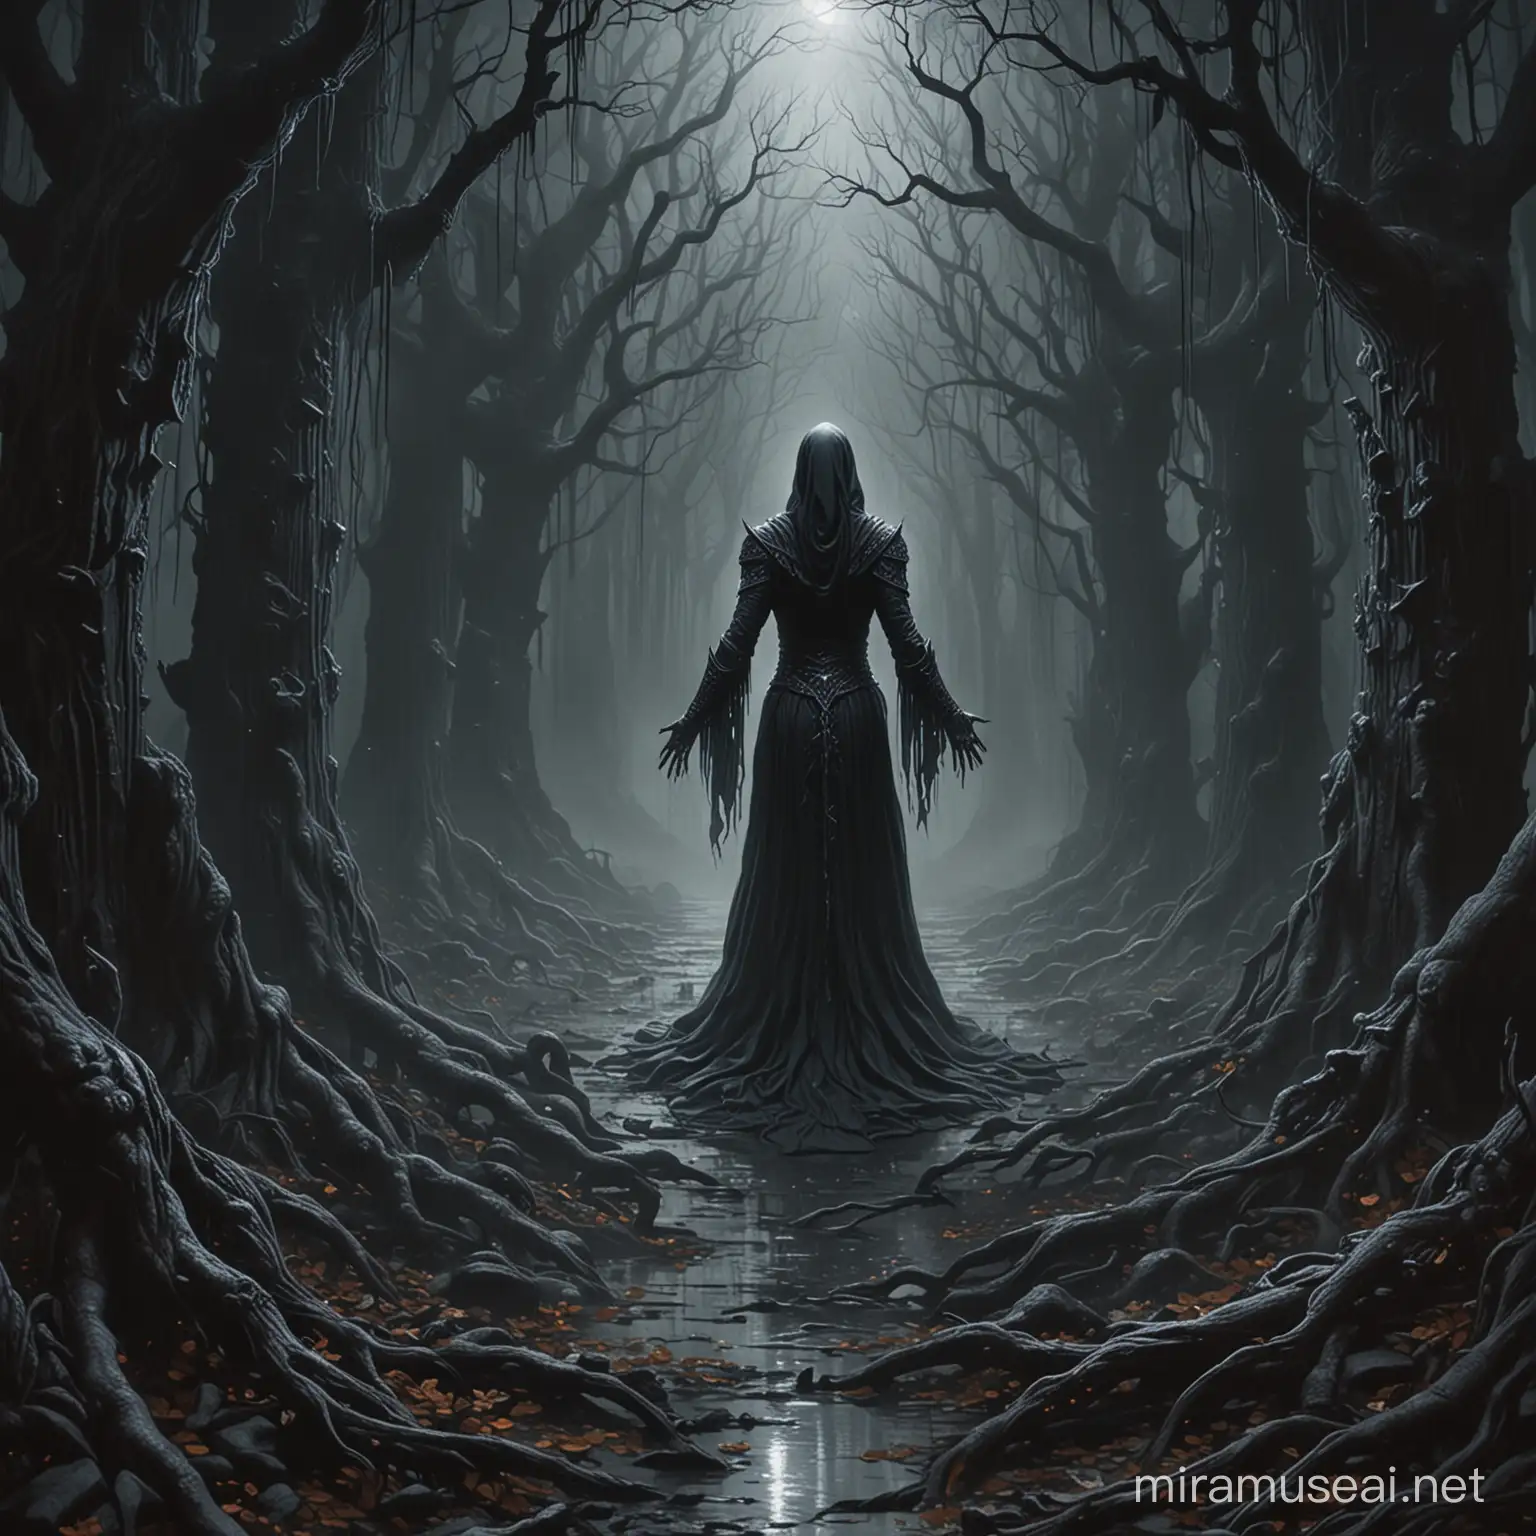 Ethereal Abyss and Labyrinth of Shadows A Mysterious and Dark Fantasy Scene